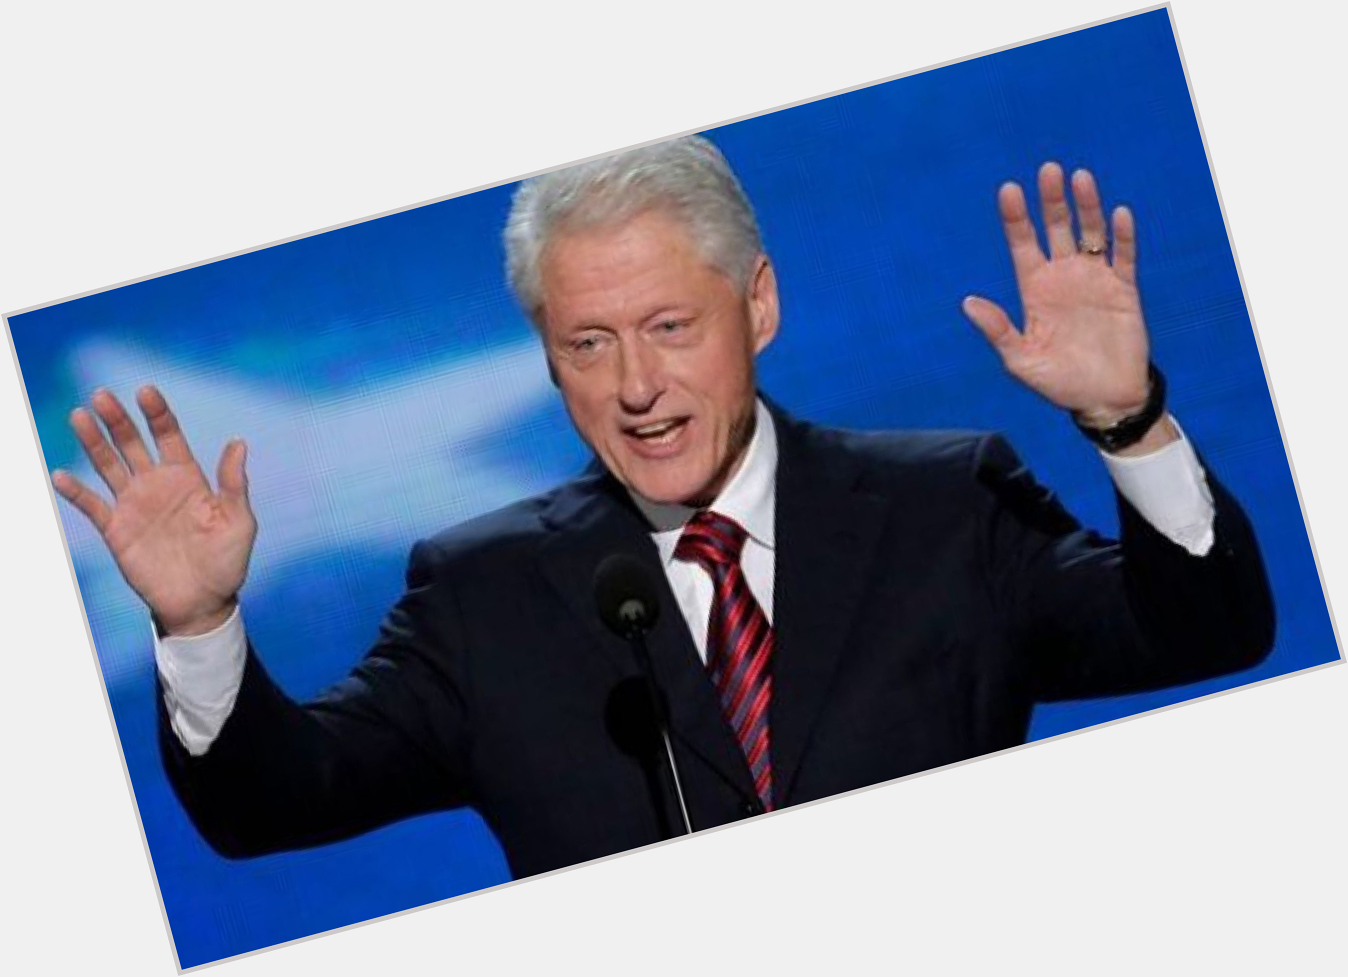 Happy Birthday to President Bill Clinton, the 42nd President of the United States!  